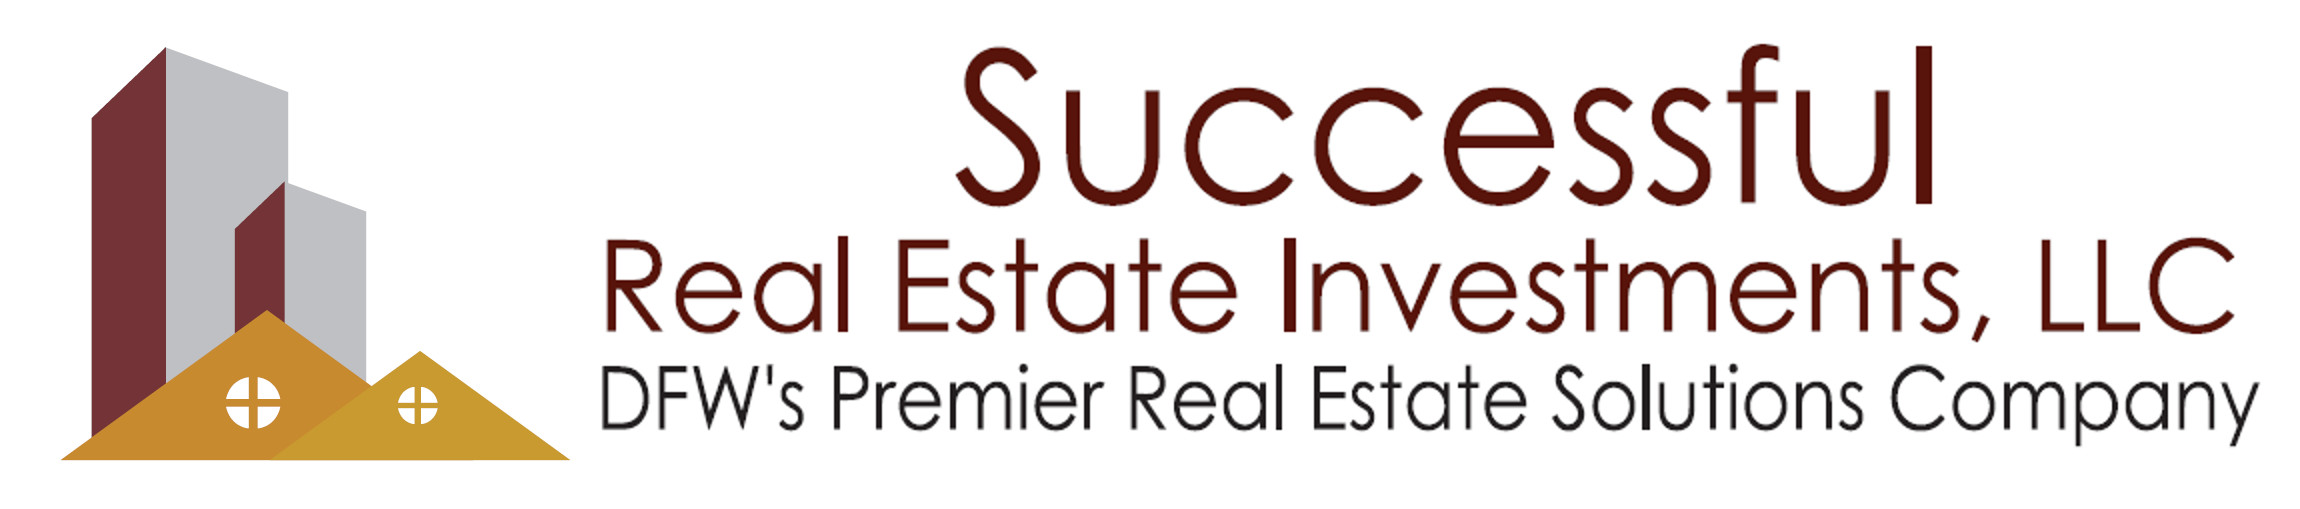 Successful Real Estate Investments (REI), LLC